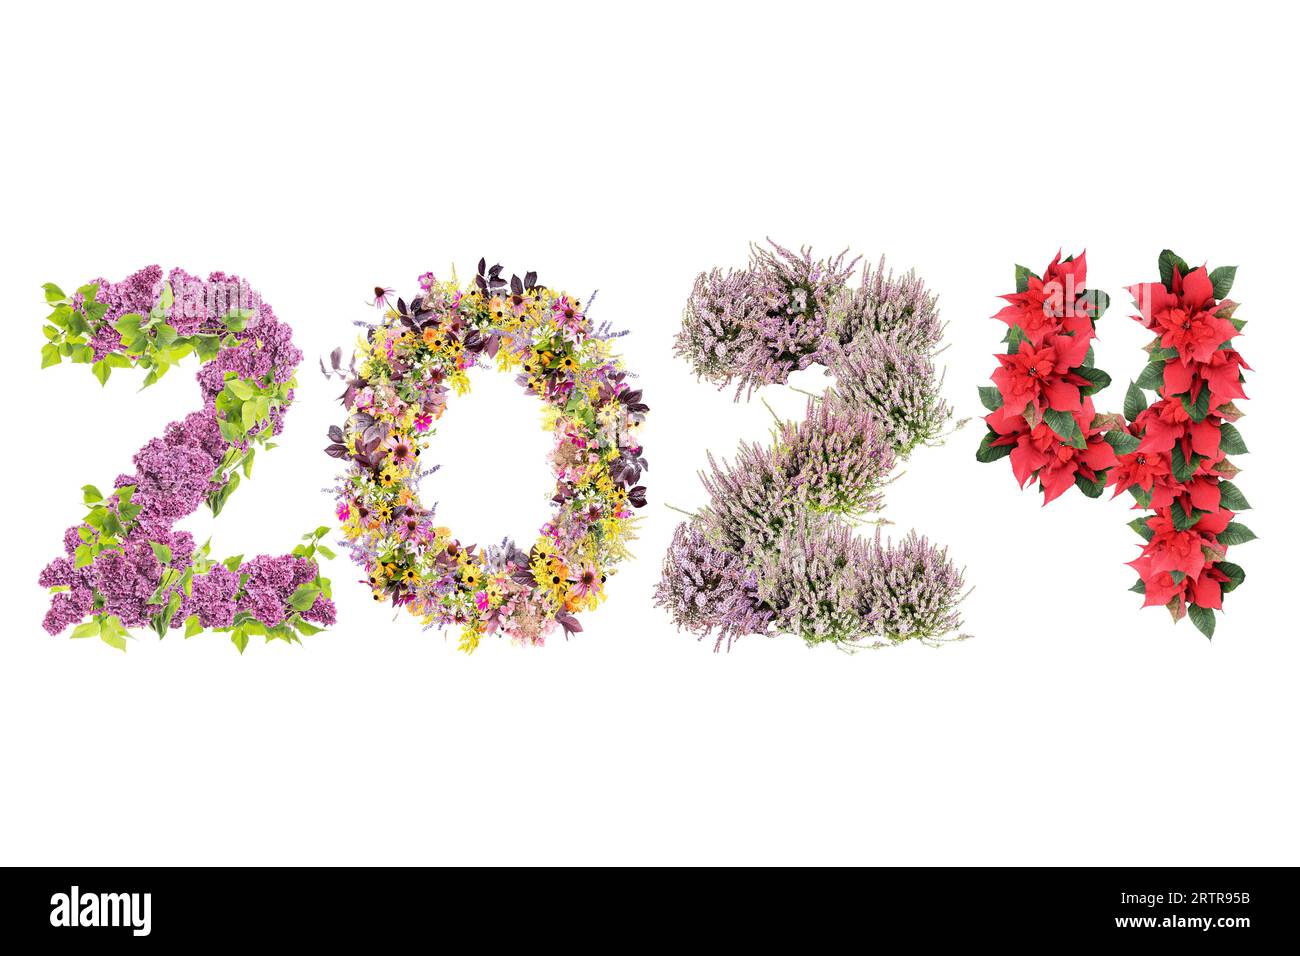 New Year 2024 Date Arranged From Seasonal Flowers Representing Four Season Of The Year 2RTR95B 